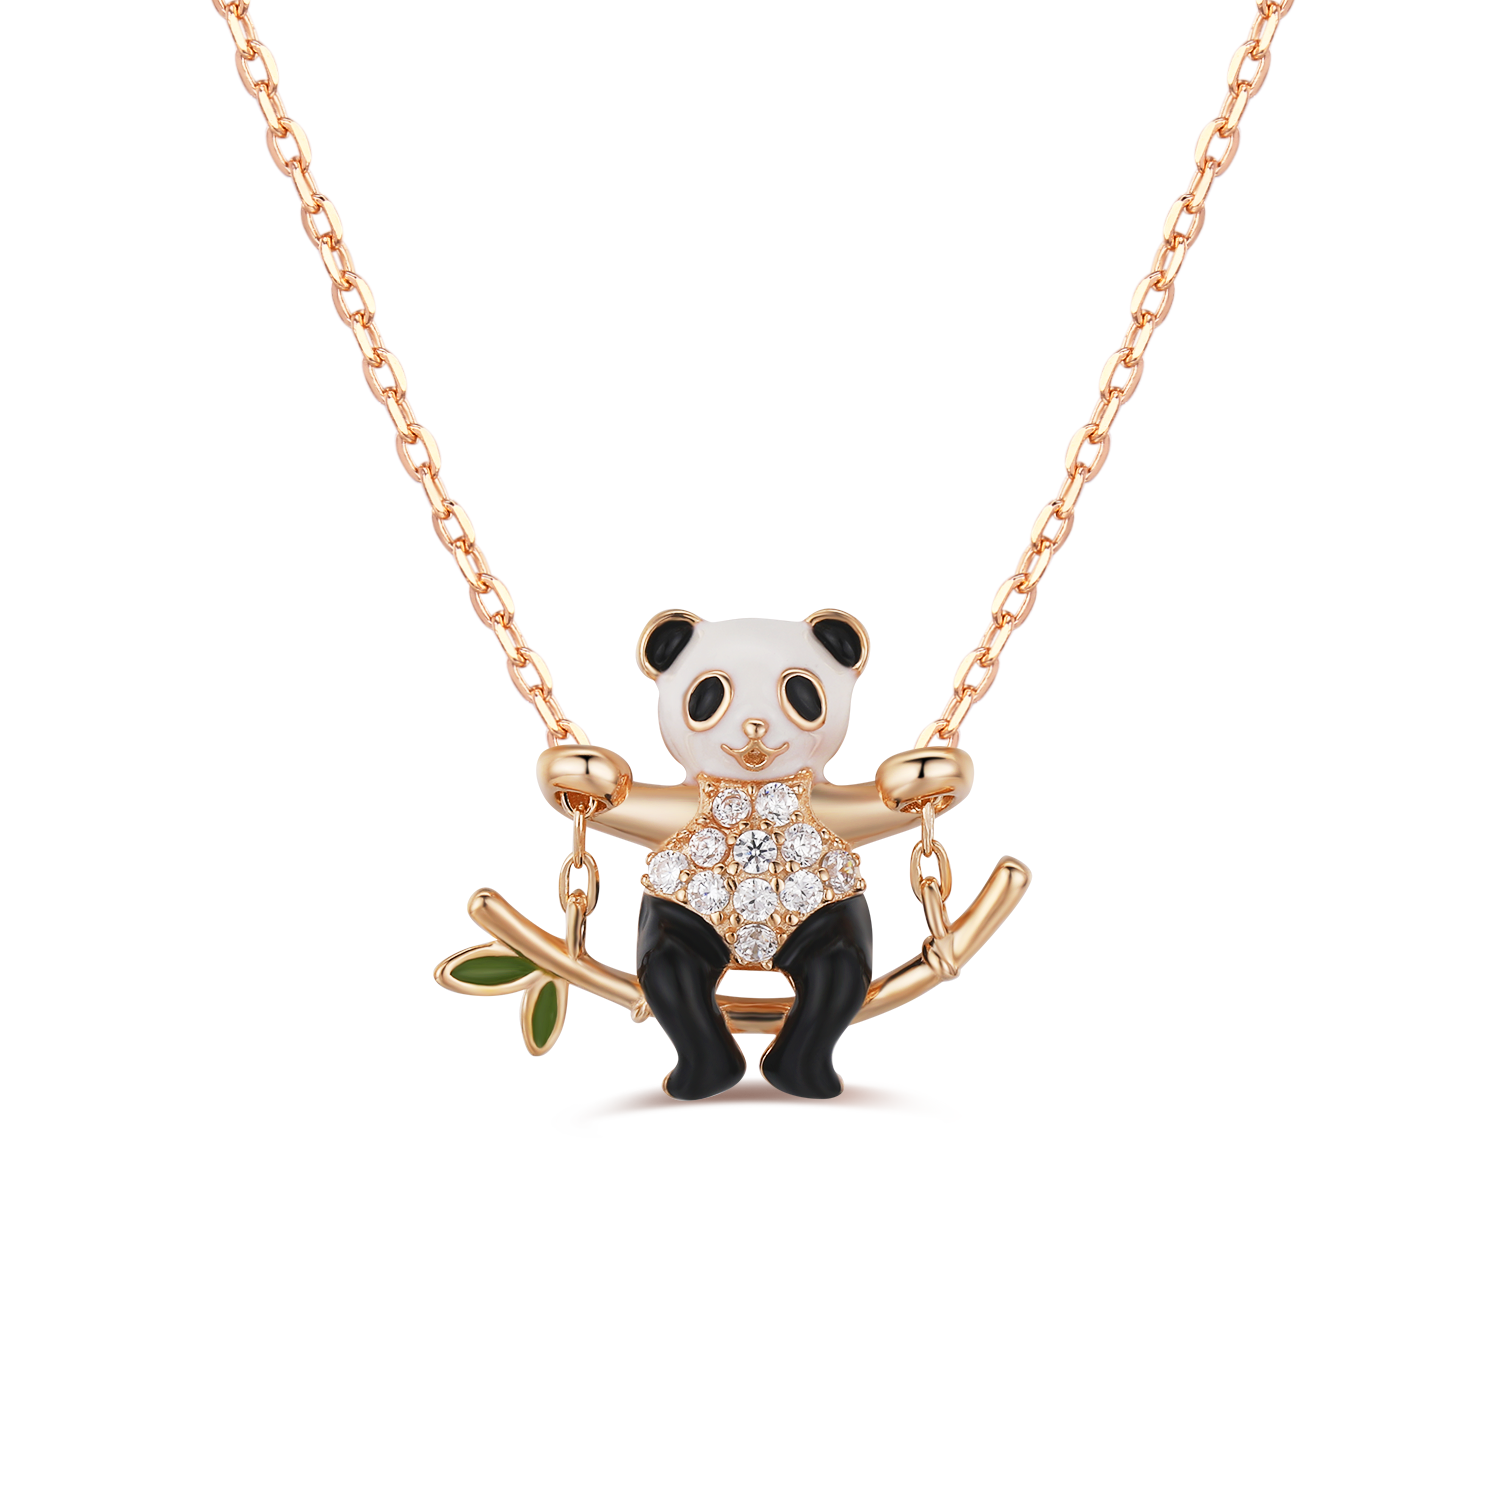 EnlightenMani Dog/Cat Paw with Panda Necklace Combo Pack of 3 necklaces Gold-plated  Plated Alloy Necklace Set Price in India - Buy EnlightenMani Dog/Cat Paw  with Panda Necklace Combo Pack of 3 necklaces